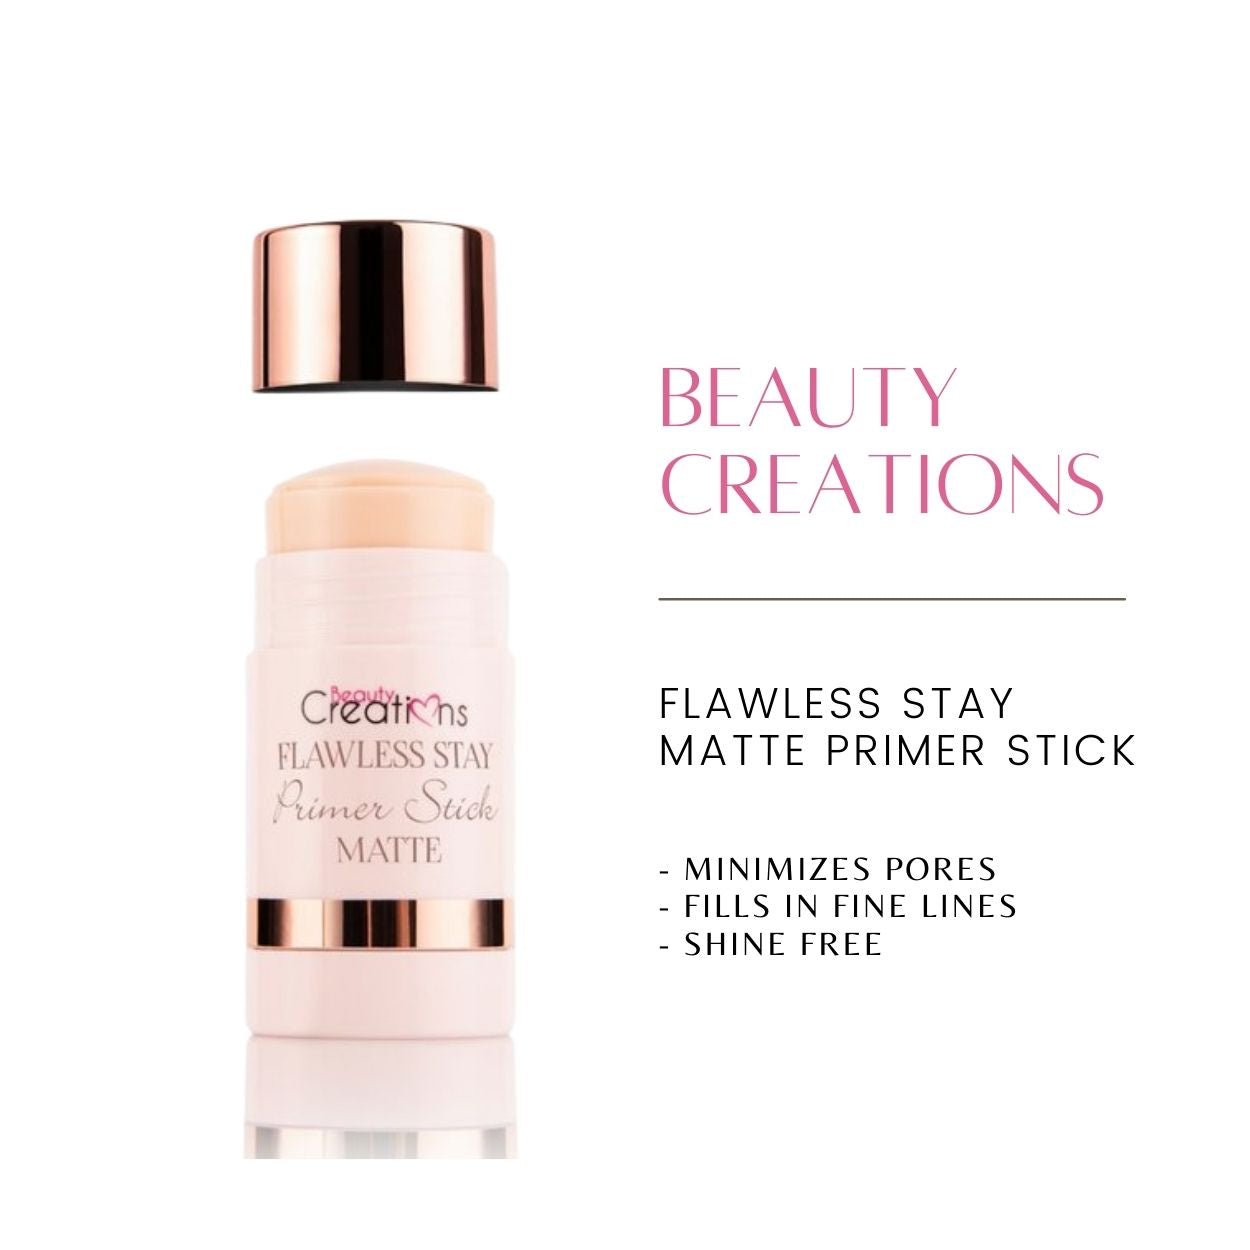 Beauty Creations, Flawless Stay Matte Primer Stick